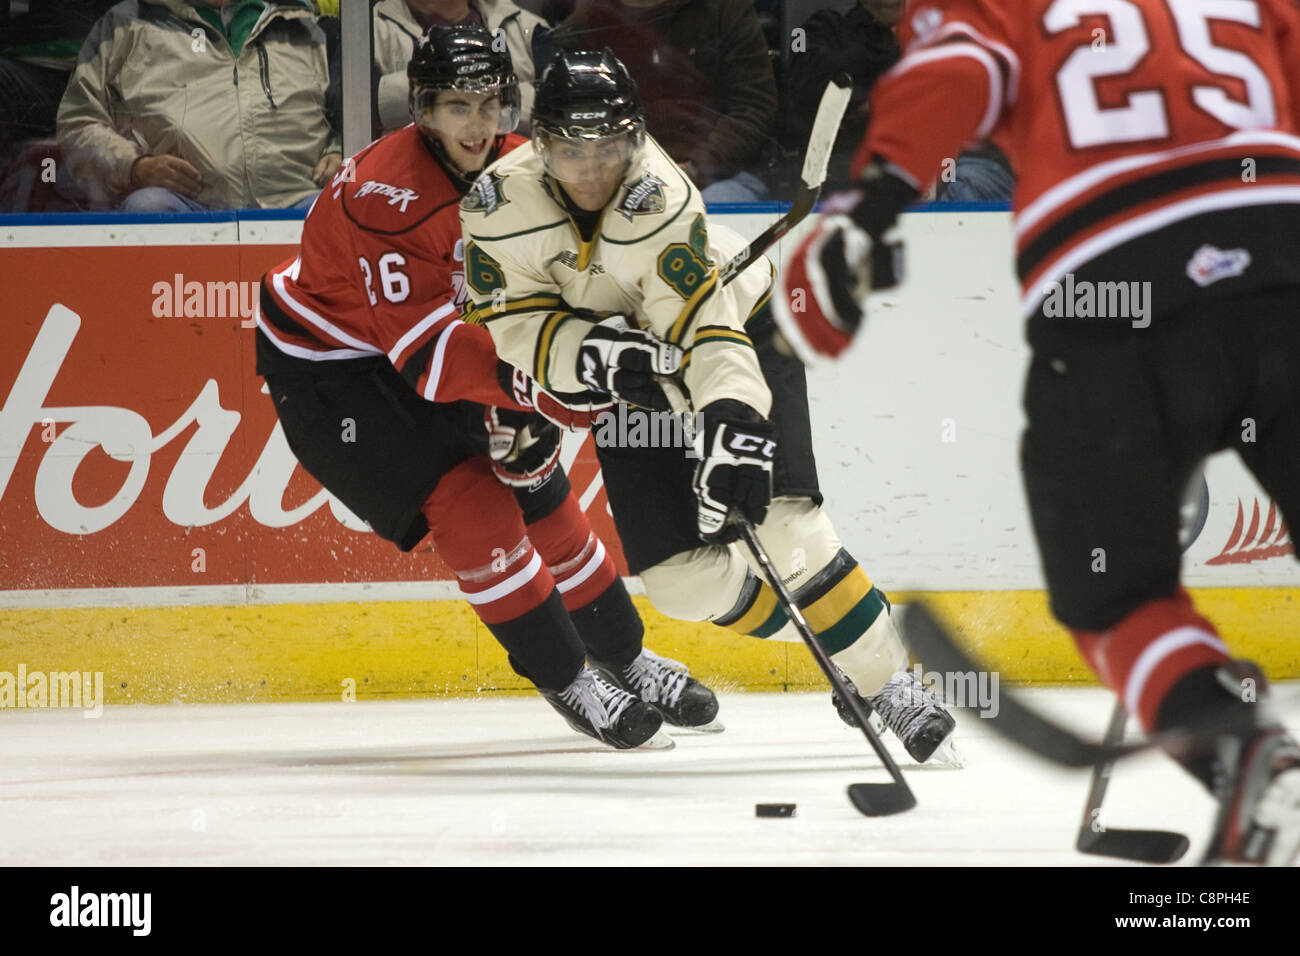 London Ontario, Canada - October 28, 2011. Andreas Athanasiou (86) of the London Knights battles against Geoffrey Schemitsch (26) of the Owen Sound Attack. London won the game in overtime 3-2. Stock Photo